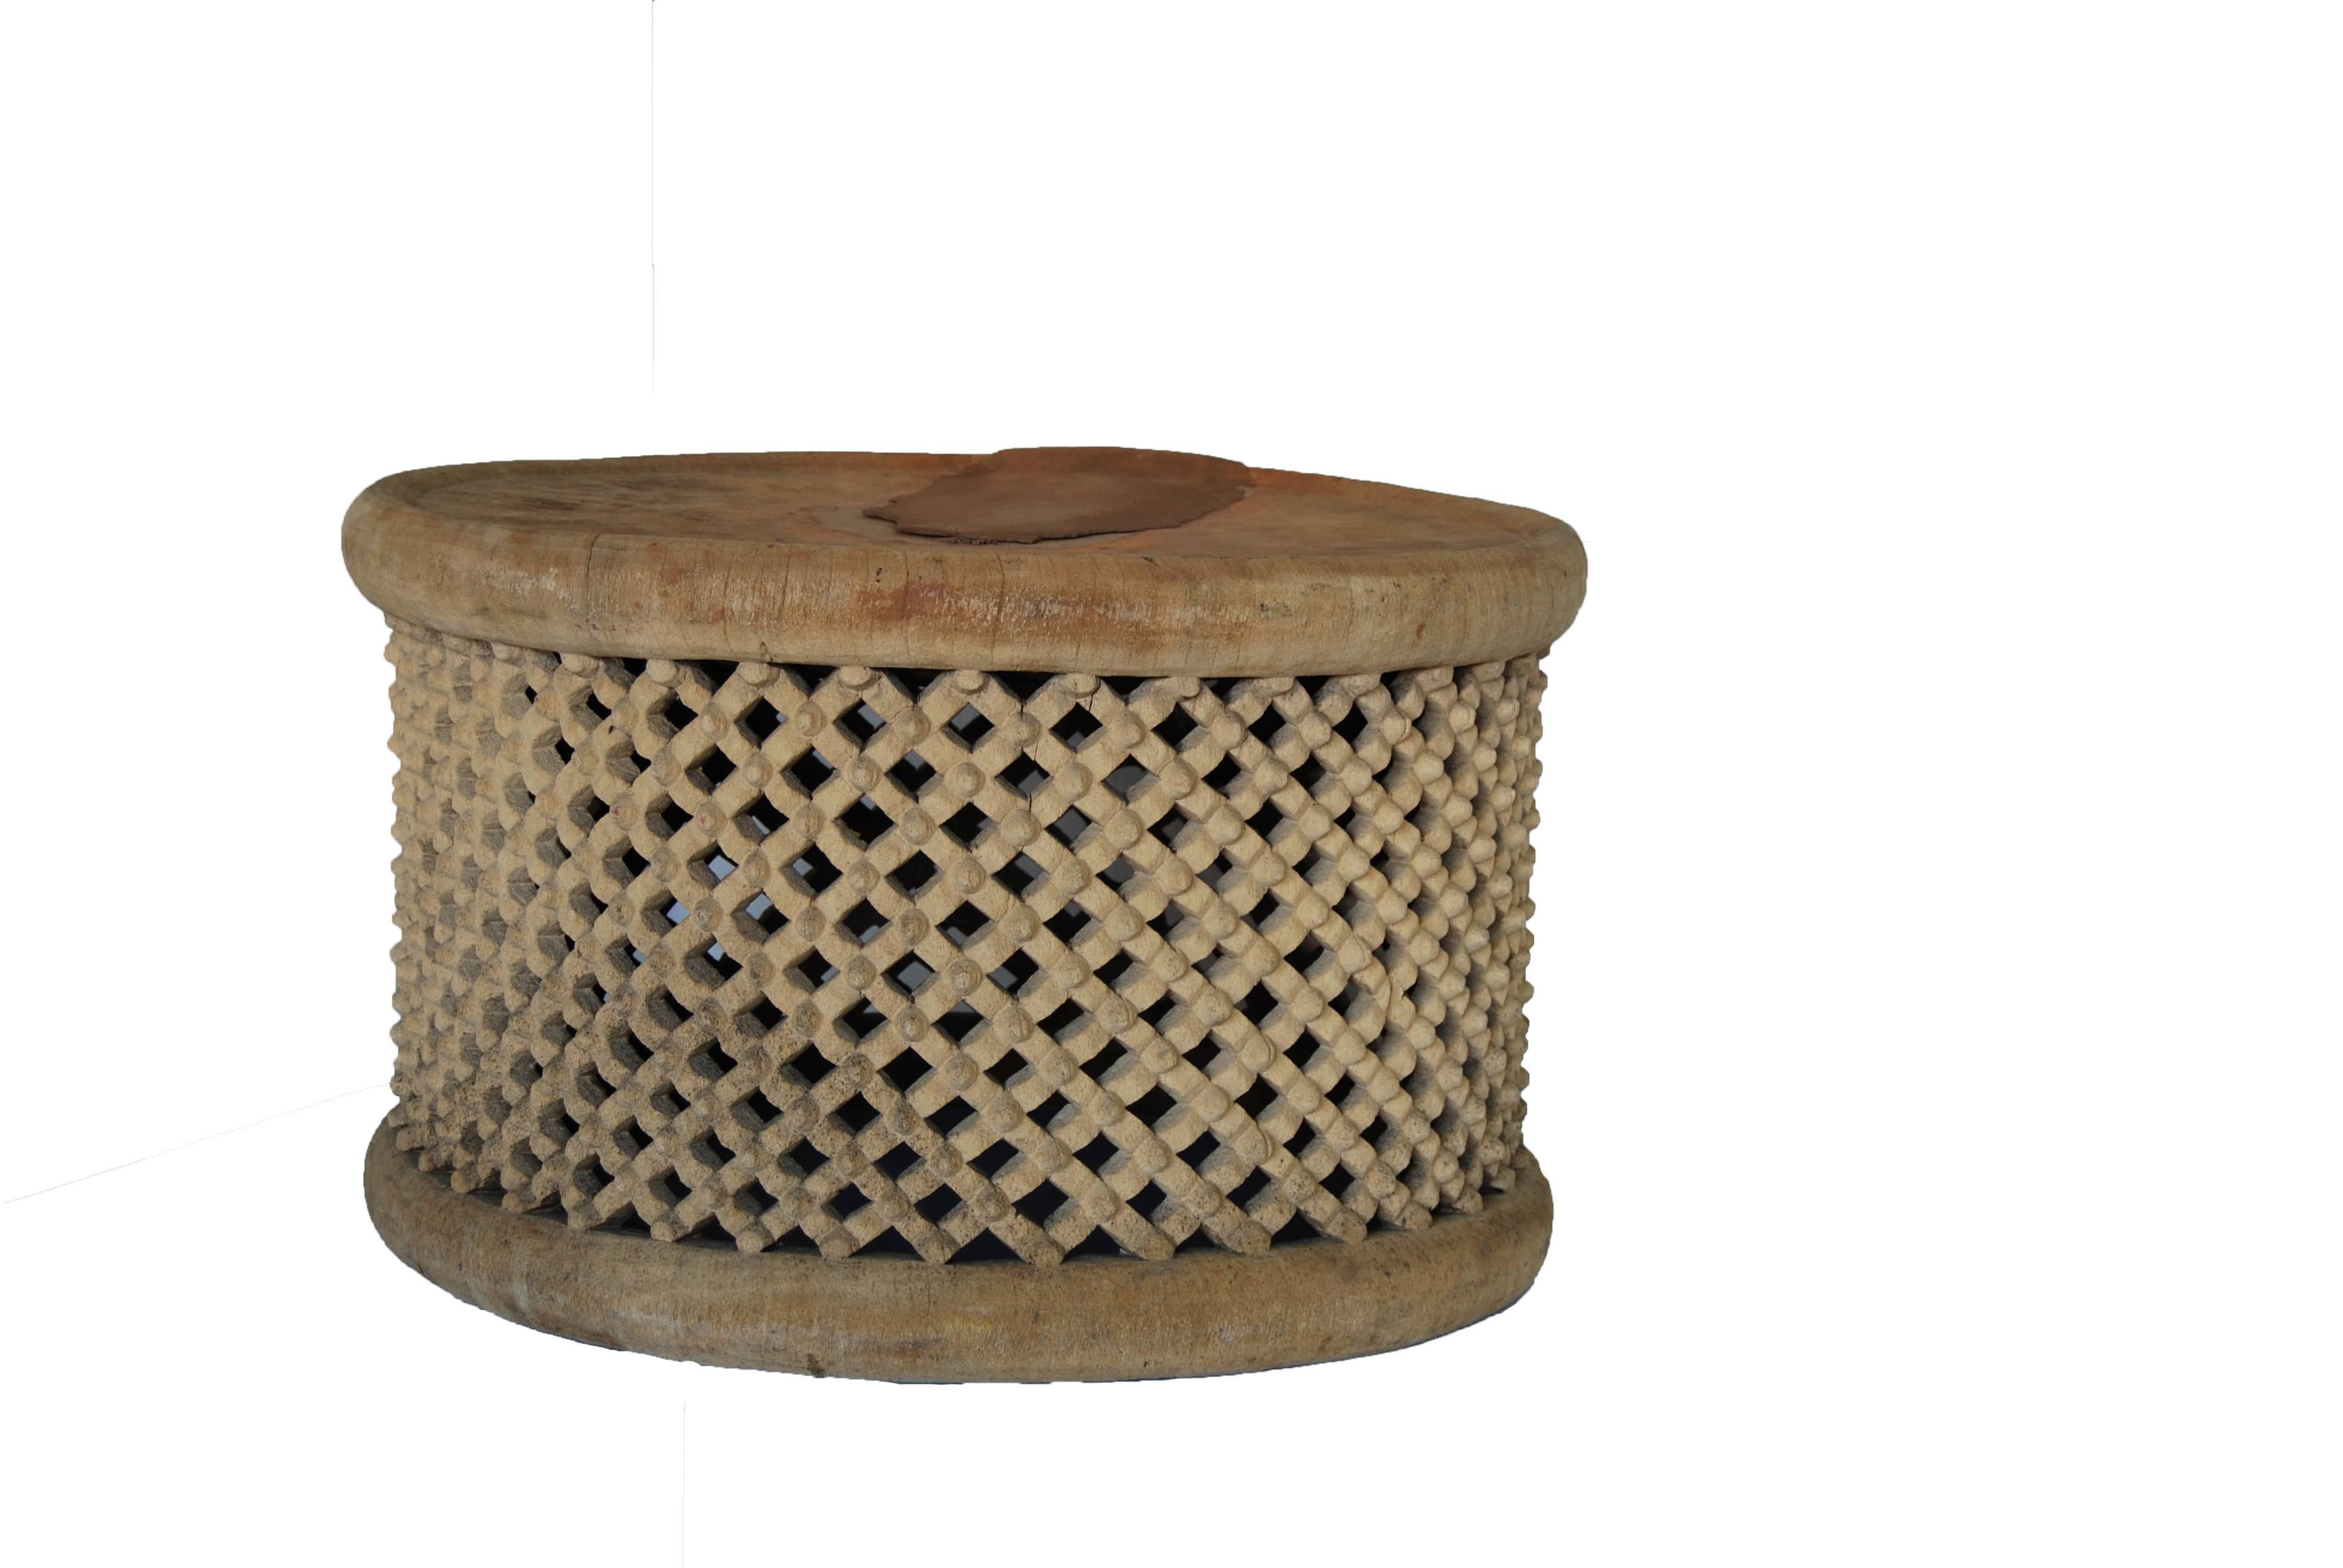 Hand-carved wood Cameroon / Bamileke stool or side table from Africa. Unique sandblasted finish.